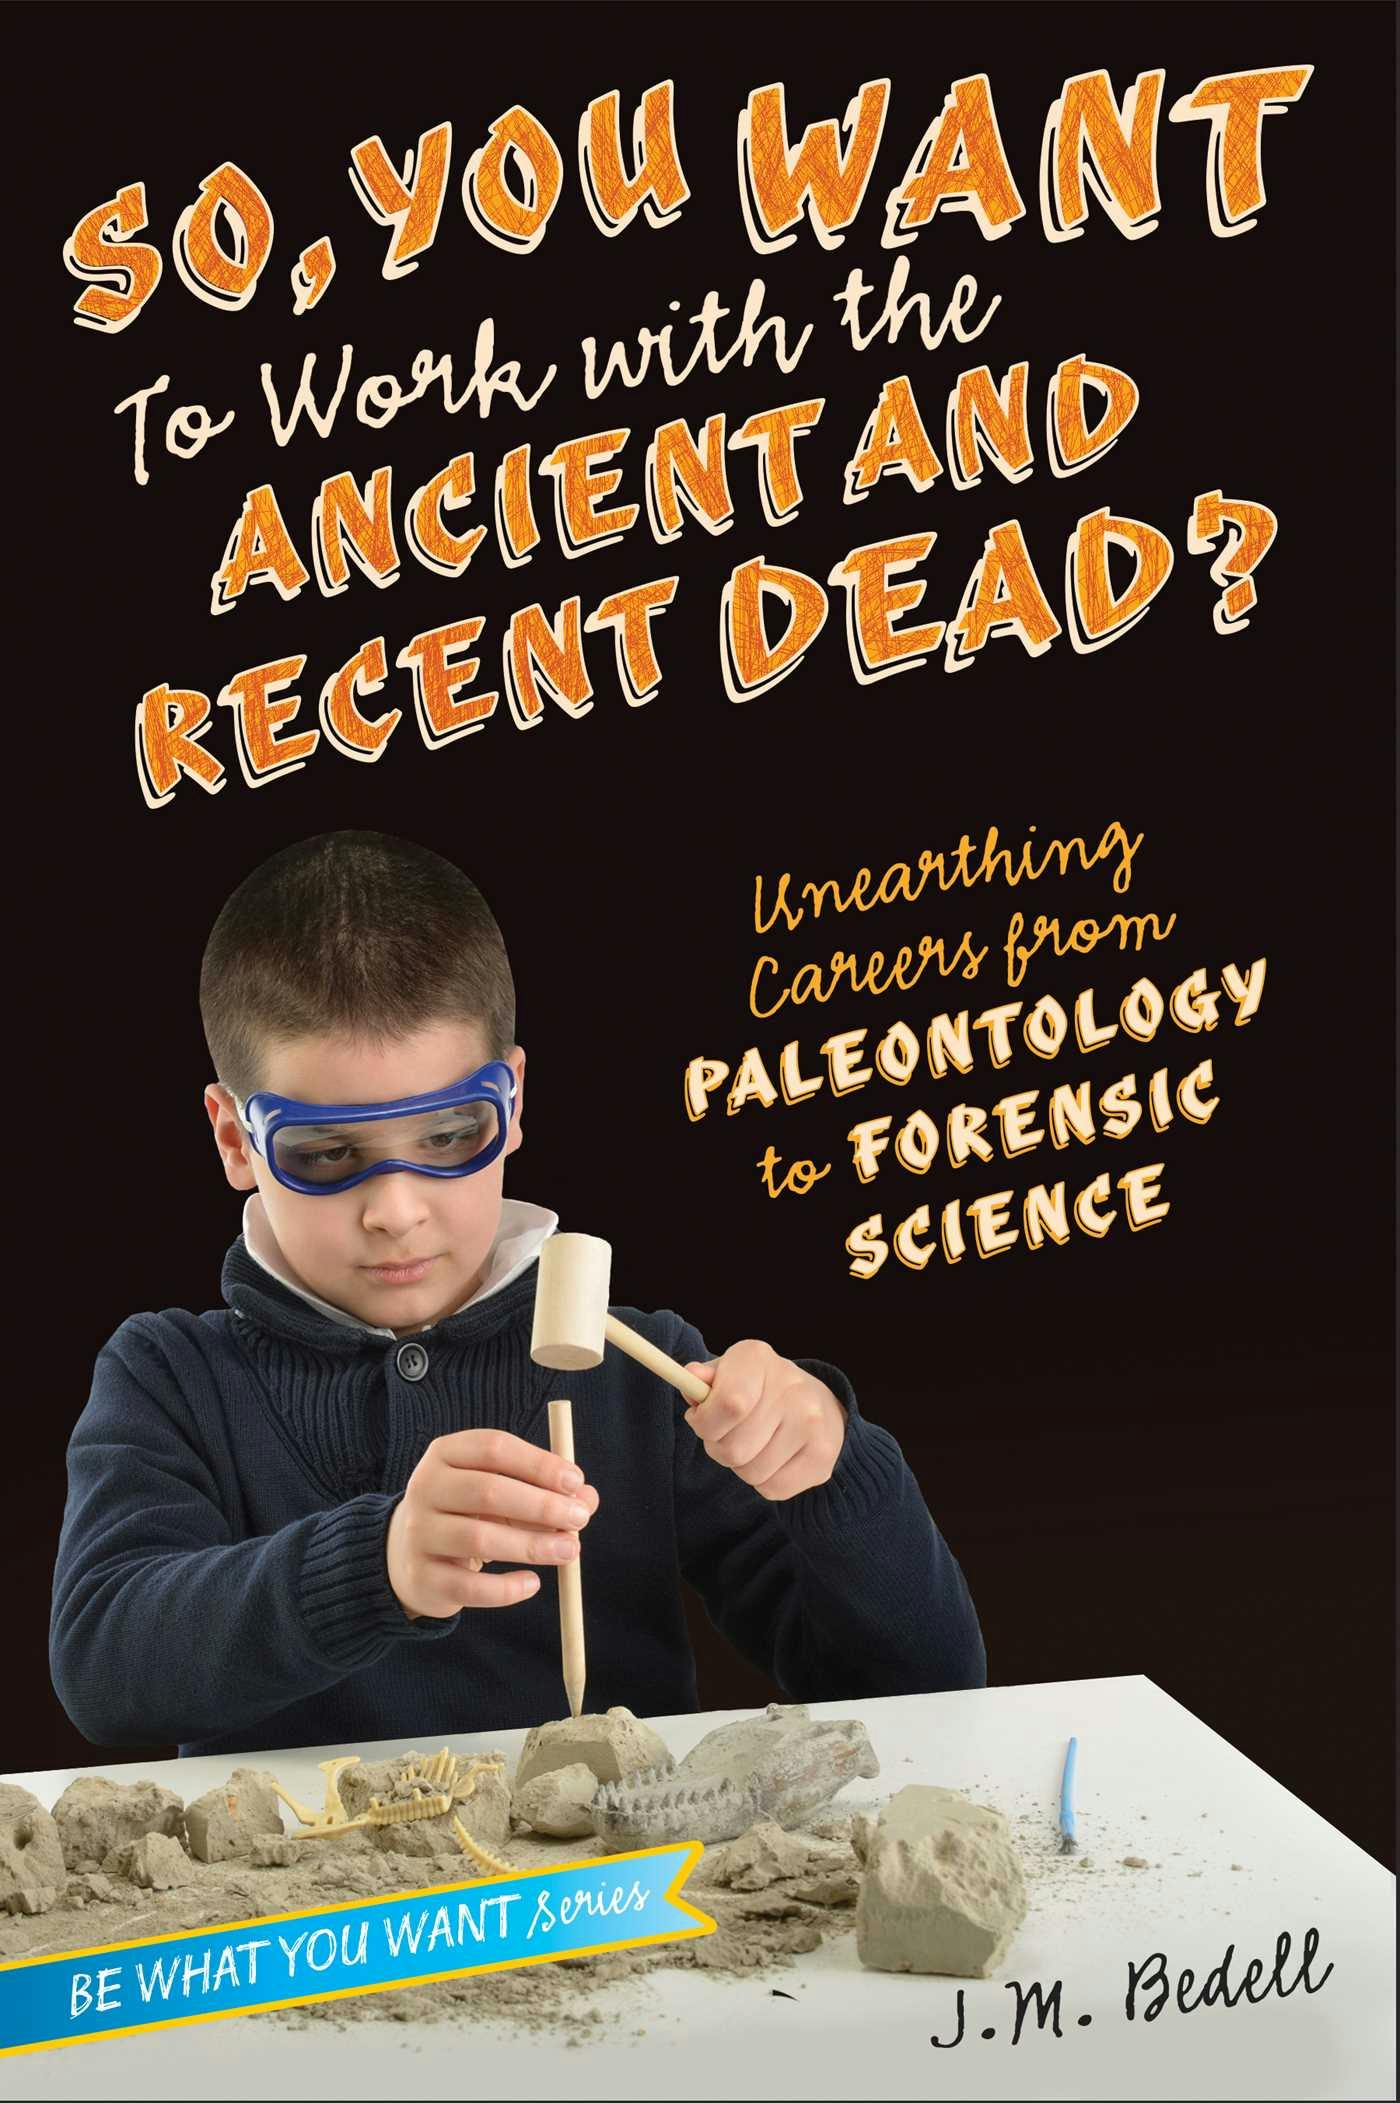 So, You Want to Work with the Ancient and Recent Dead?: Unearthing Careers from Paleontology to Forensic Science - J. M. Bedell